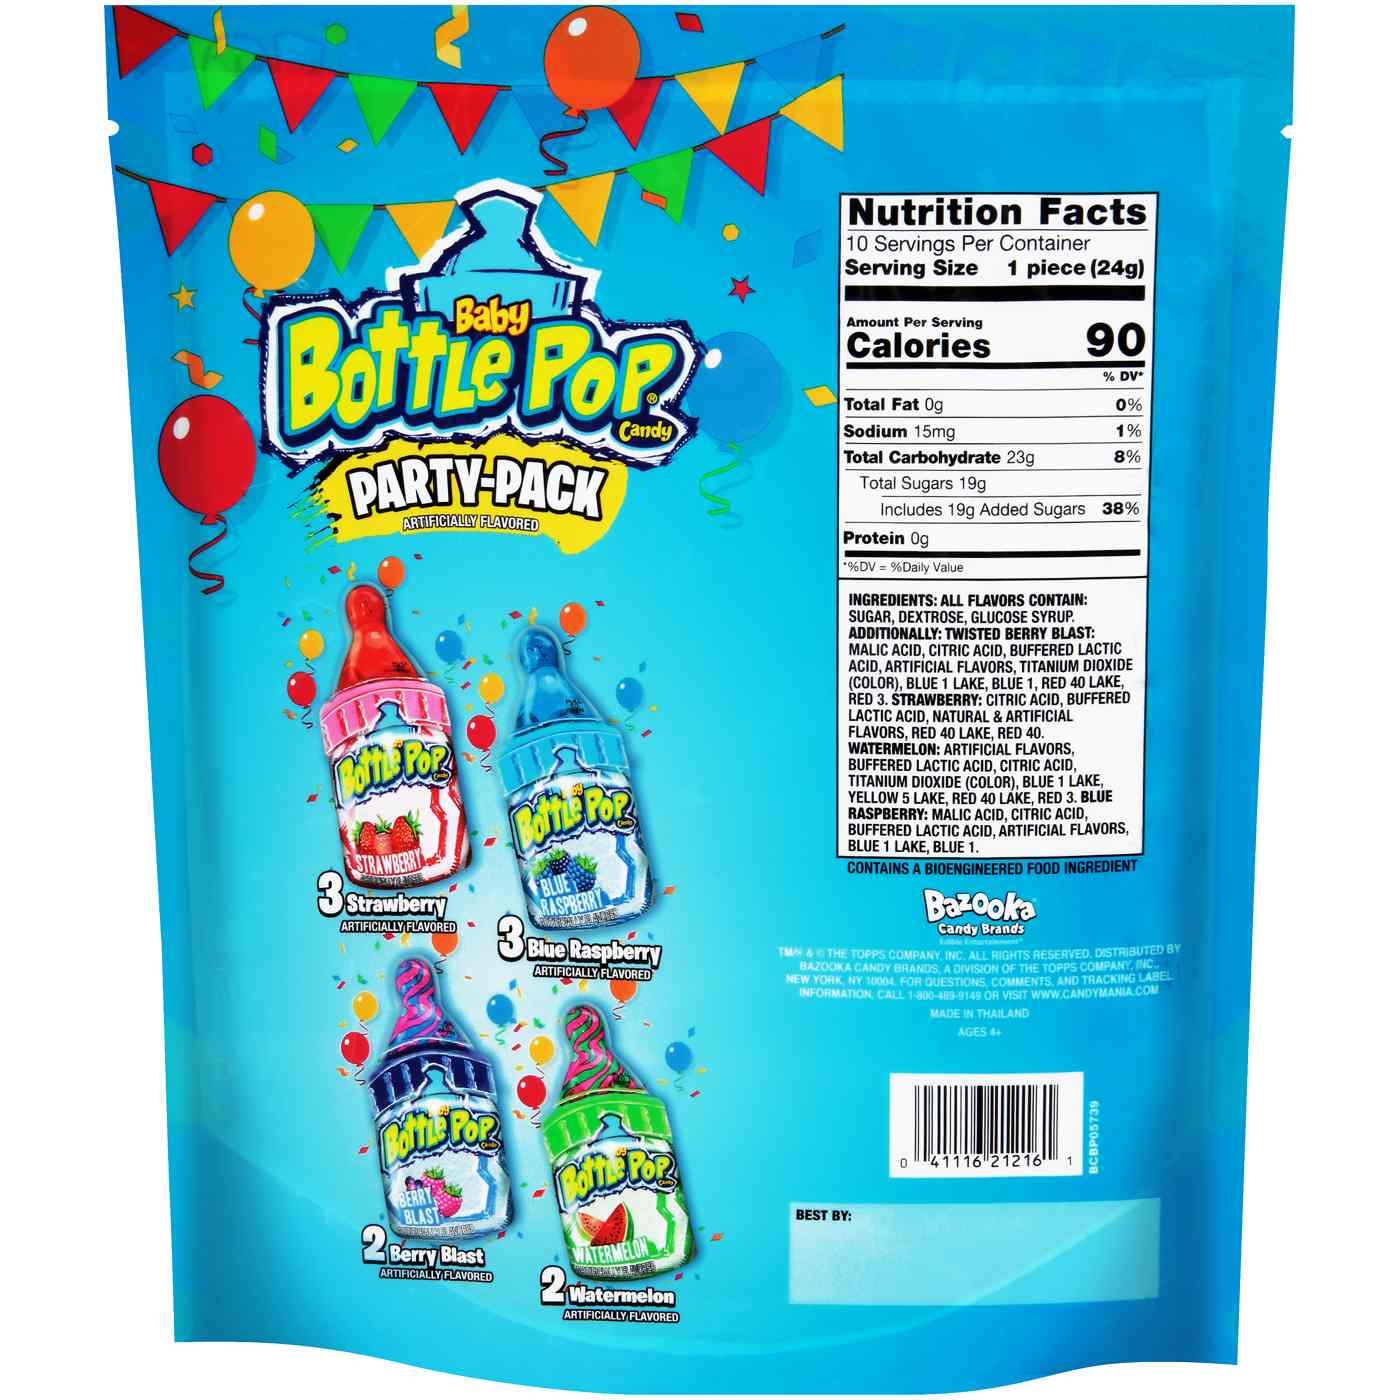 Baby Bottle Pop Candy Party Pack; image 2 of 2